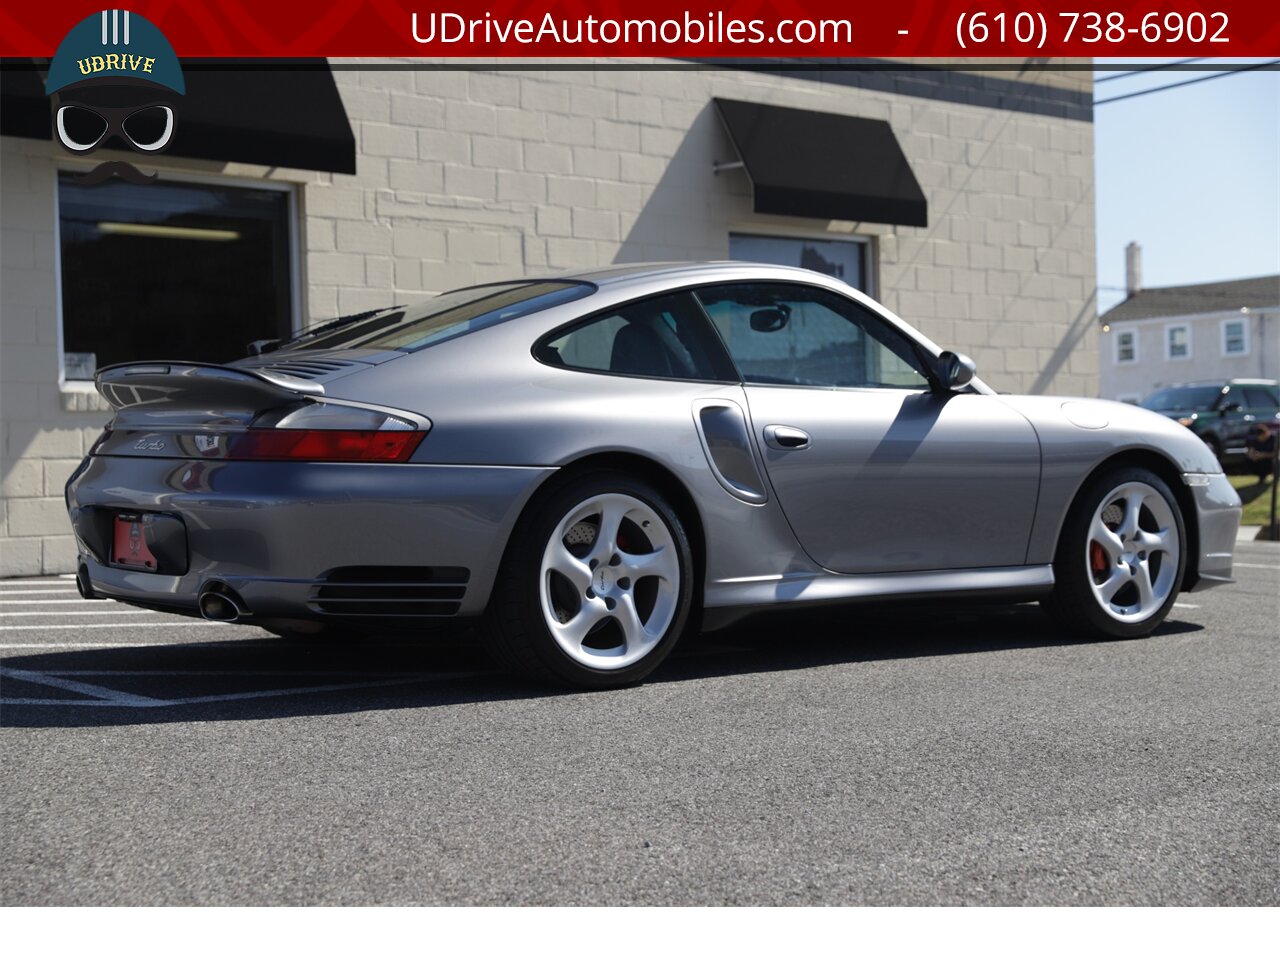 2003 Porsche 911 996 Turbo X50 Power Kit 6 Speed Seal Grey  over Black Leather - Photo 19 - West Chester, PA 19382